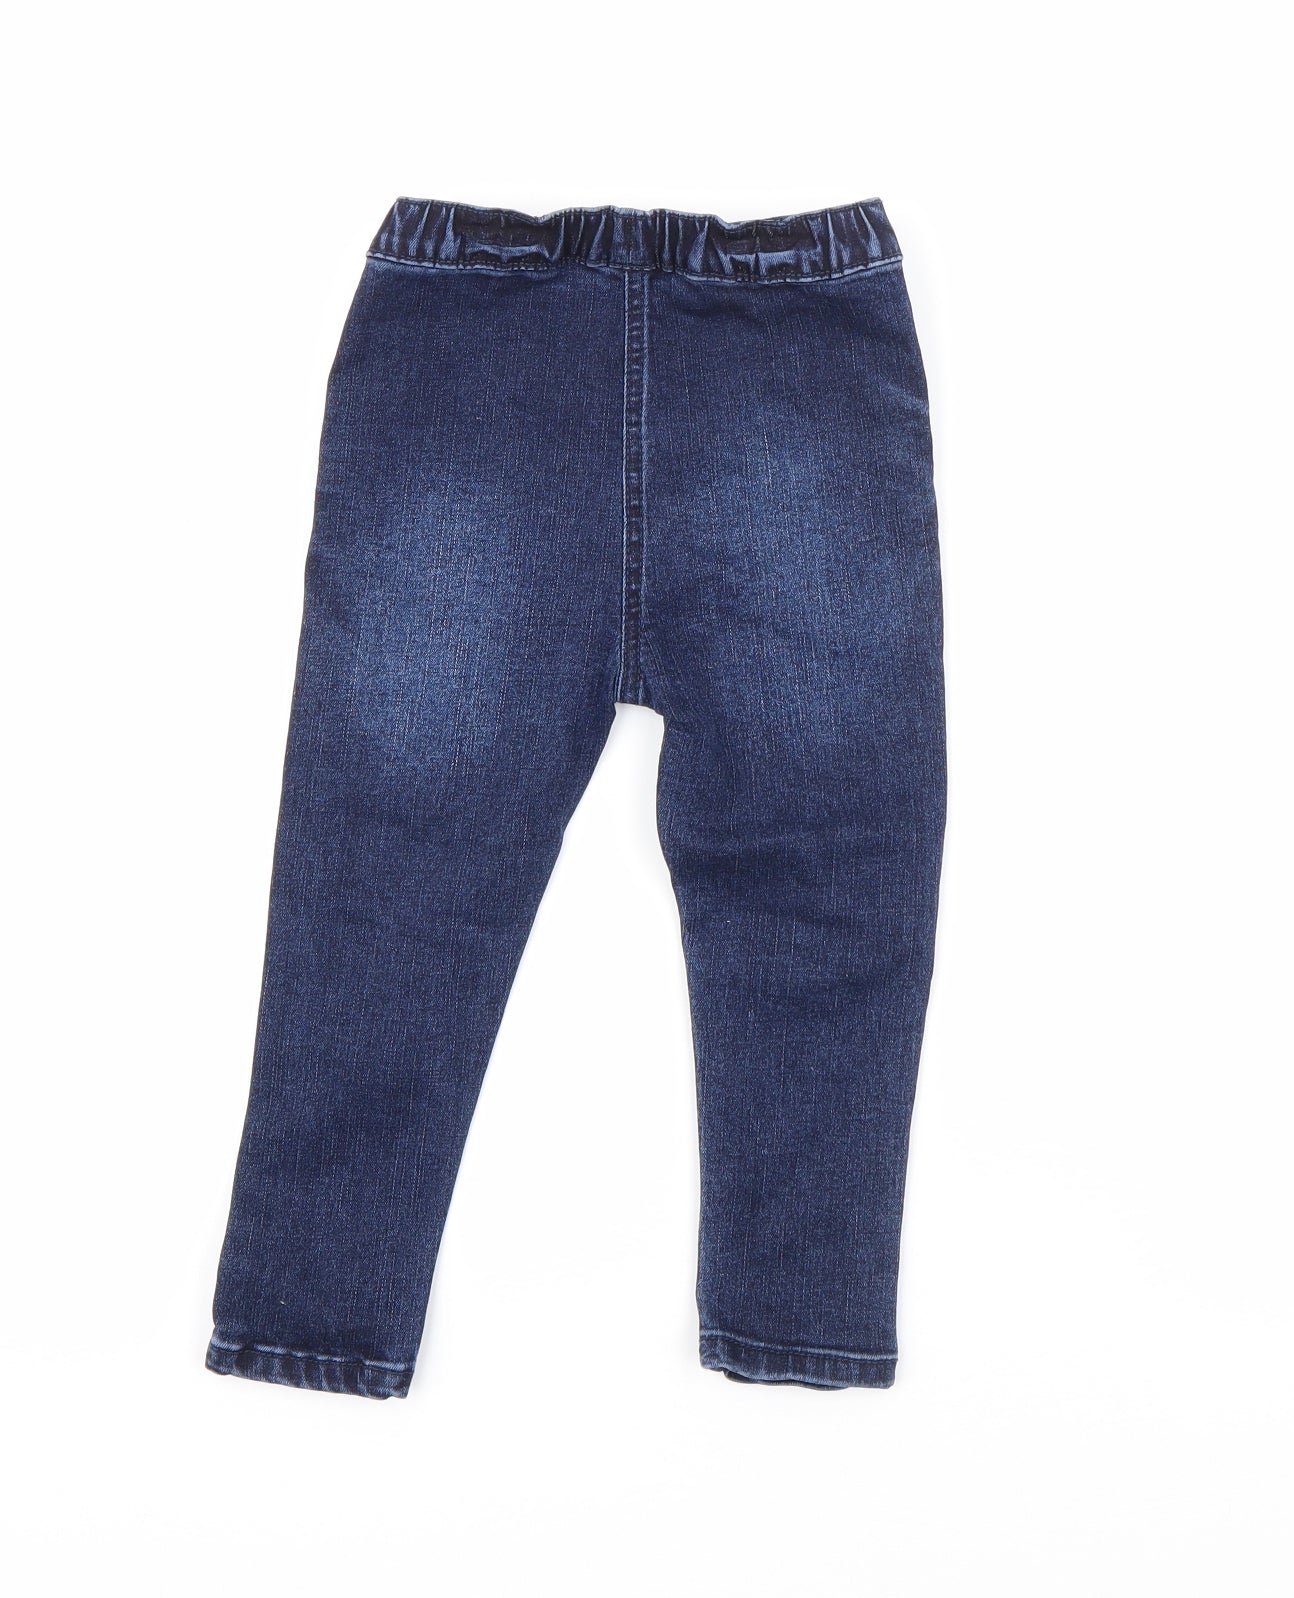 Dunnes Stores Girls Blue  Cotton Skinny Jeans Size 2-3 Years  Regular